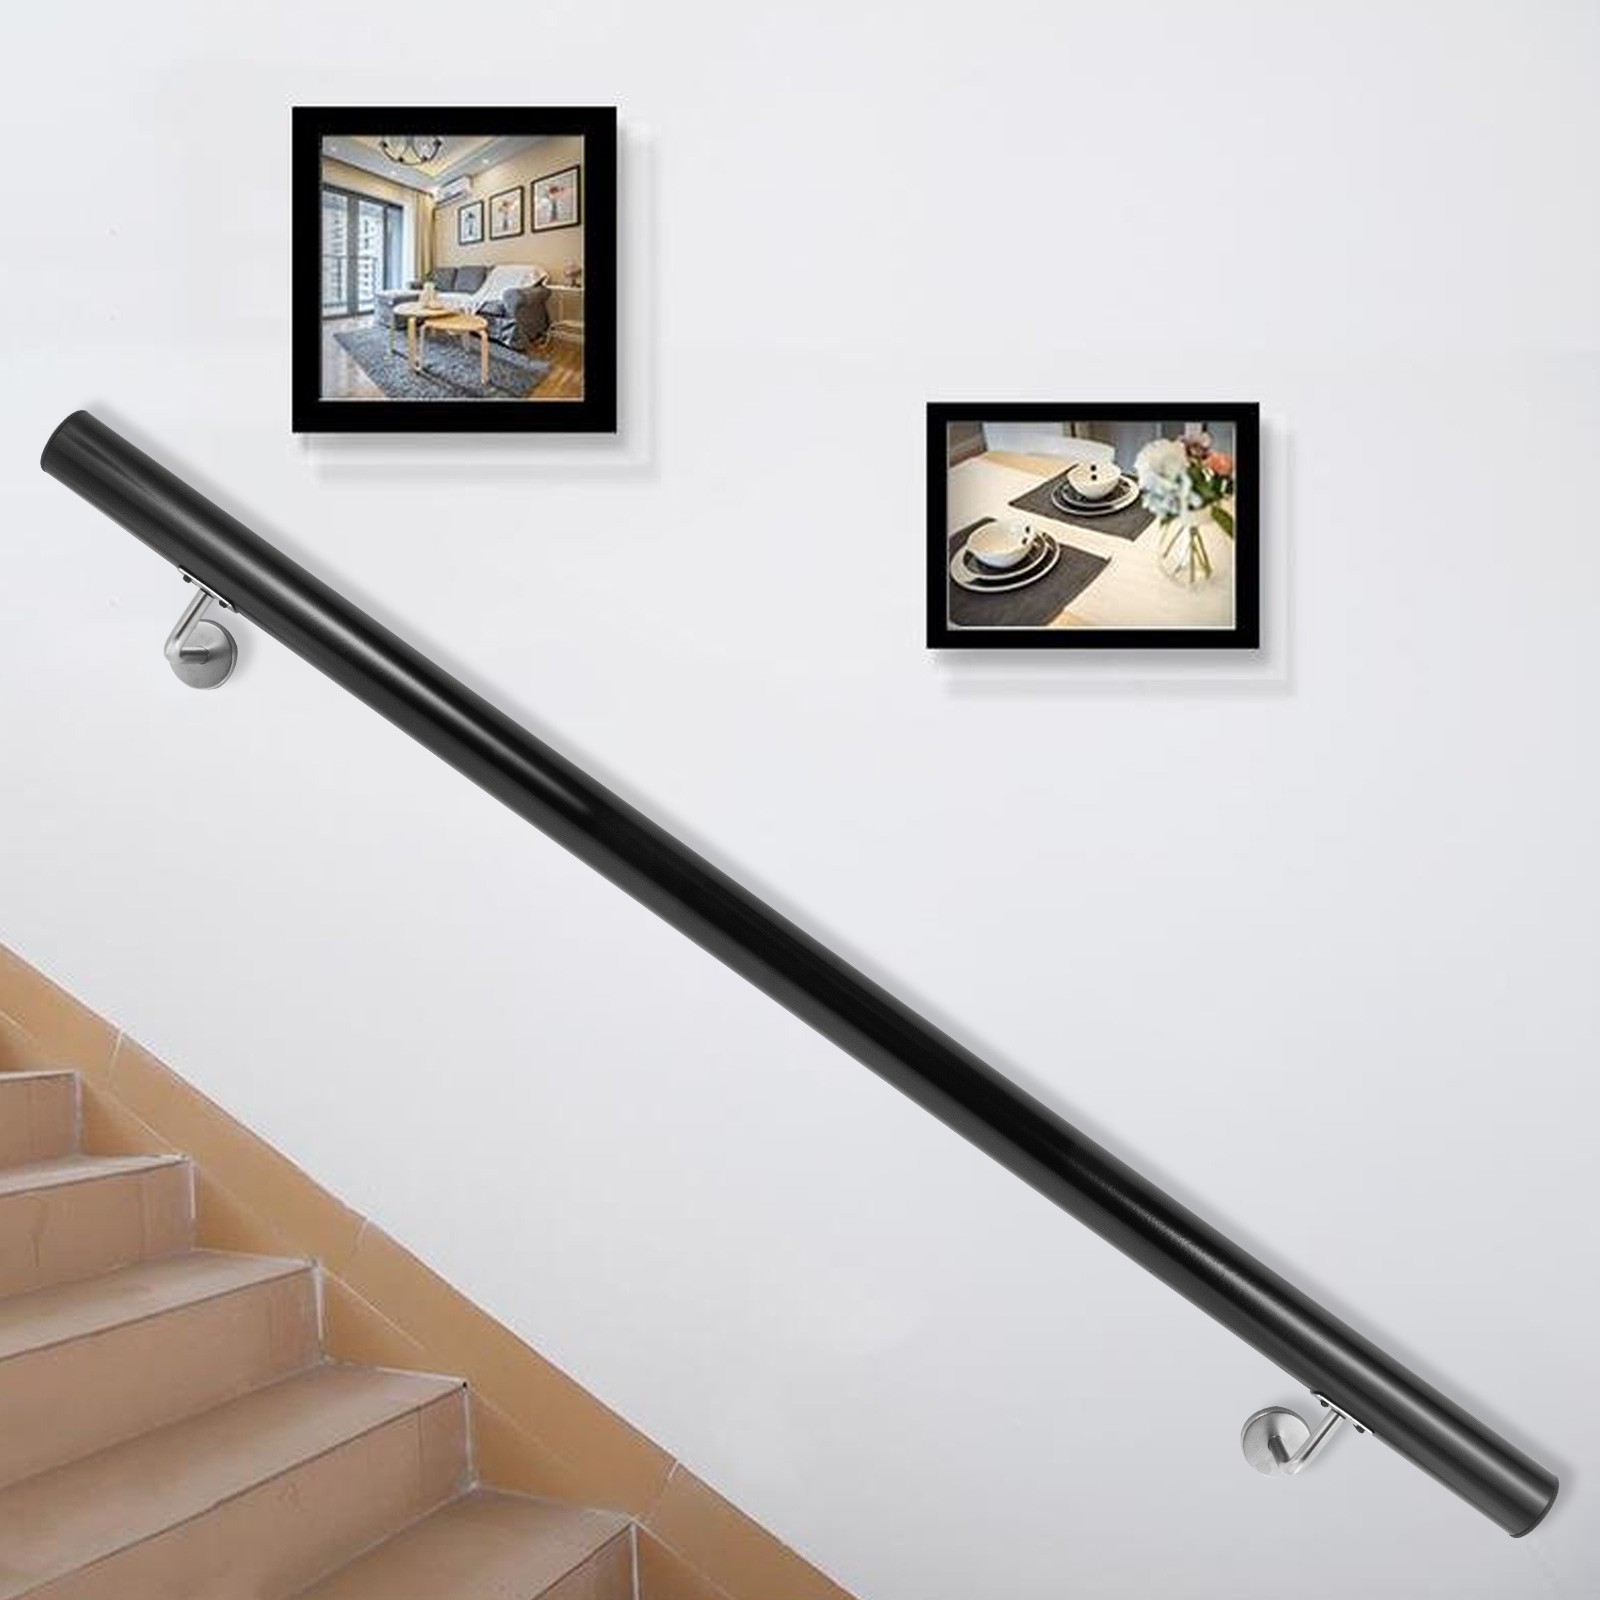 Stair Handrail Stair Rail 4ft Aluminum Alloy Handrail For Stairs 200lbs Load от Vevor Many GEOs